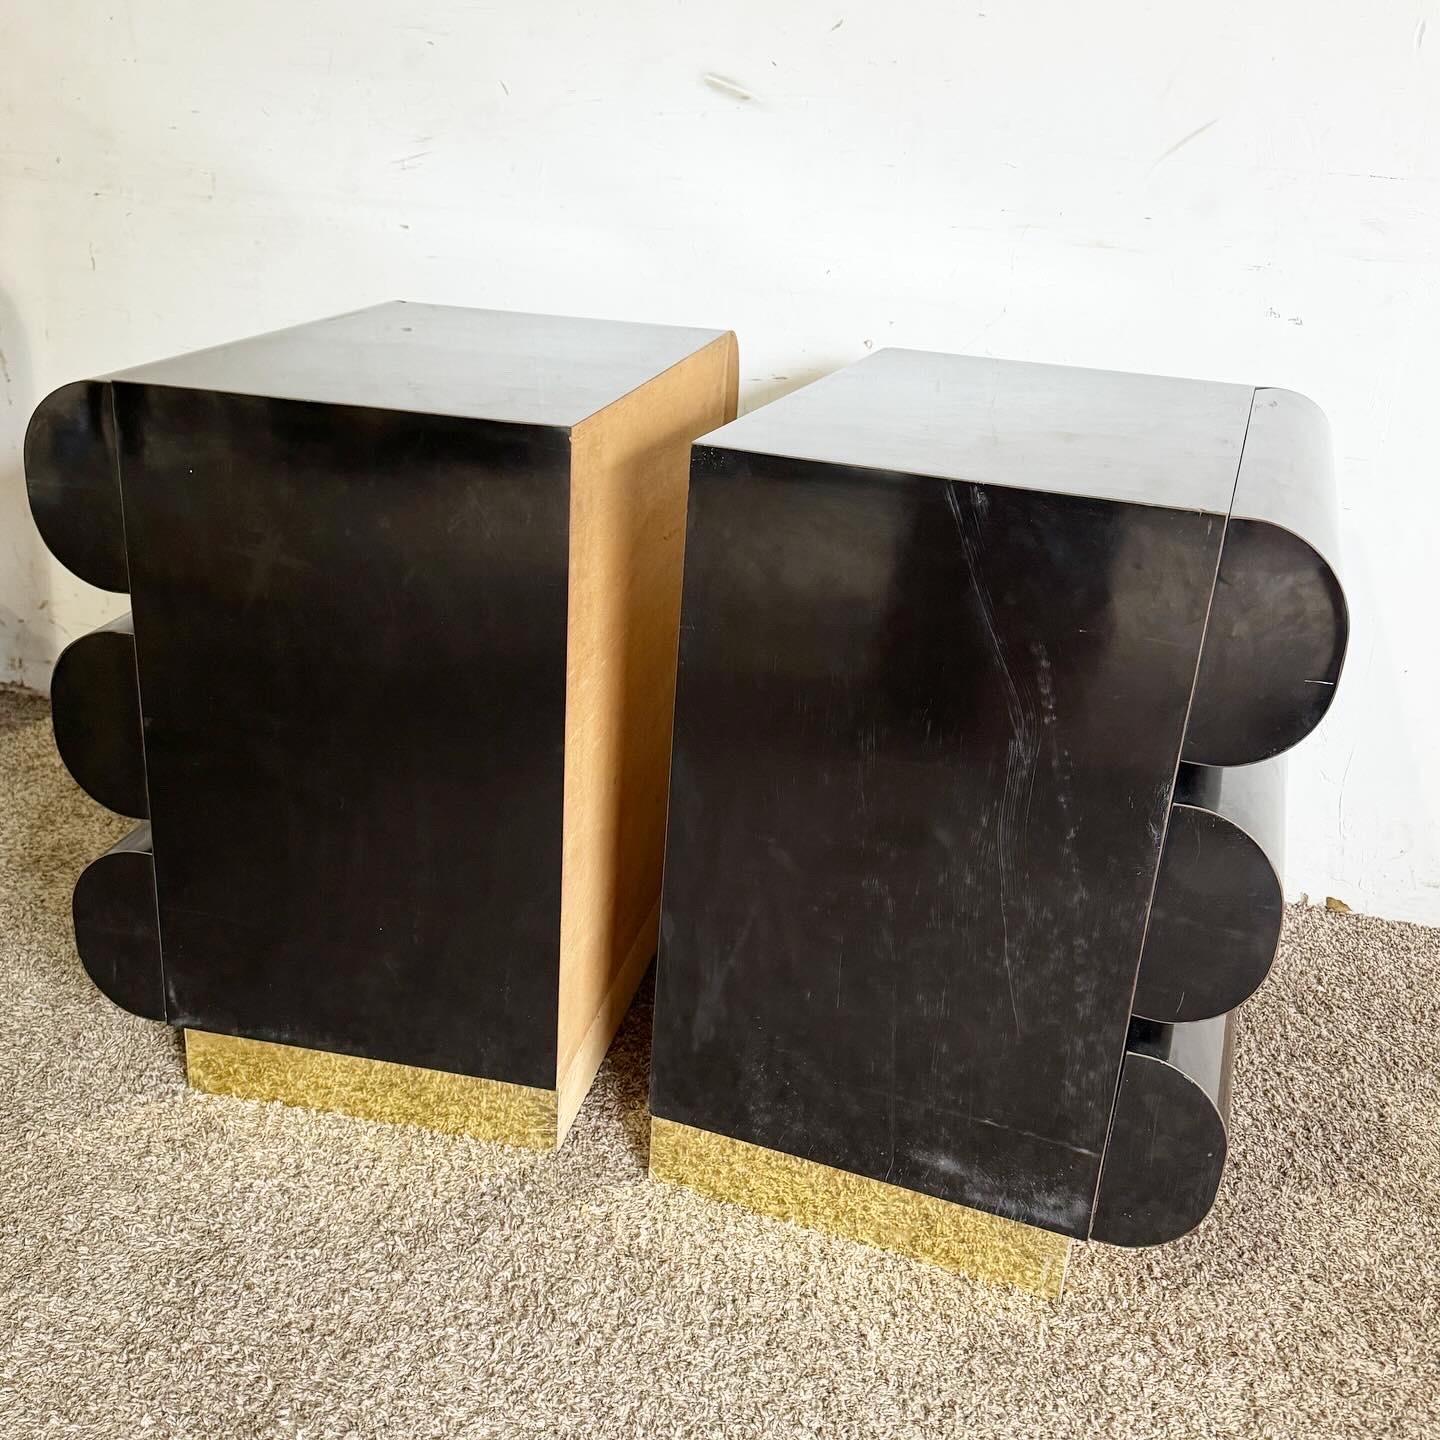 Postmodern Black Lacquer Laminate Bullnose Nightstands With Gold Base - a Pair For Sale 1